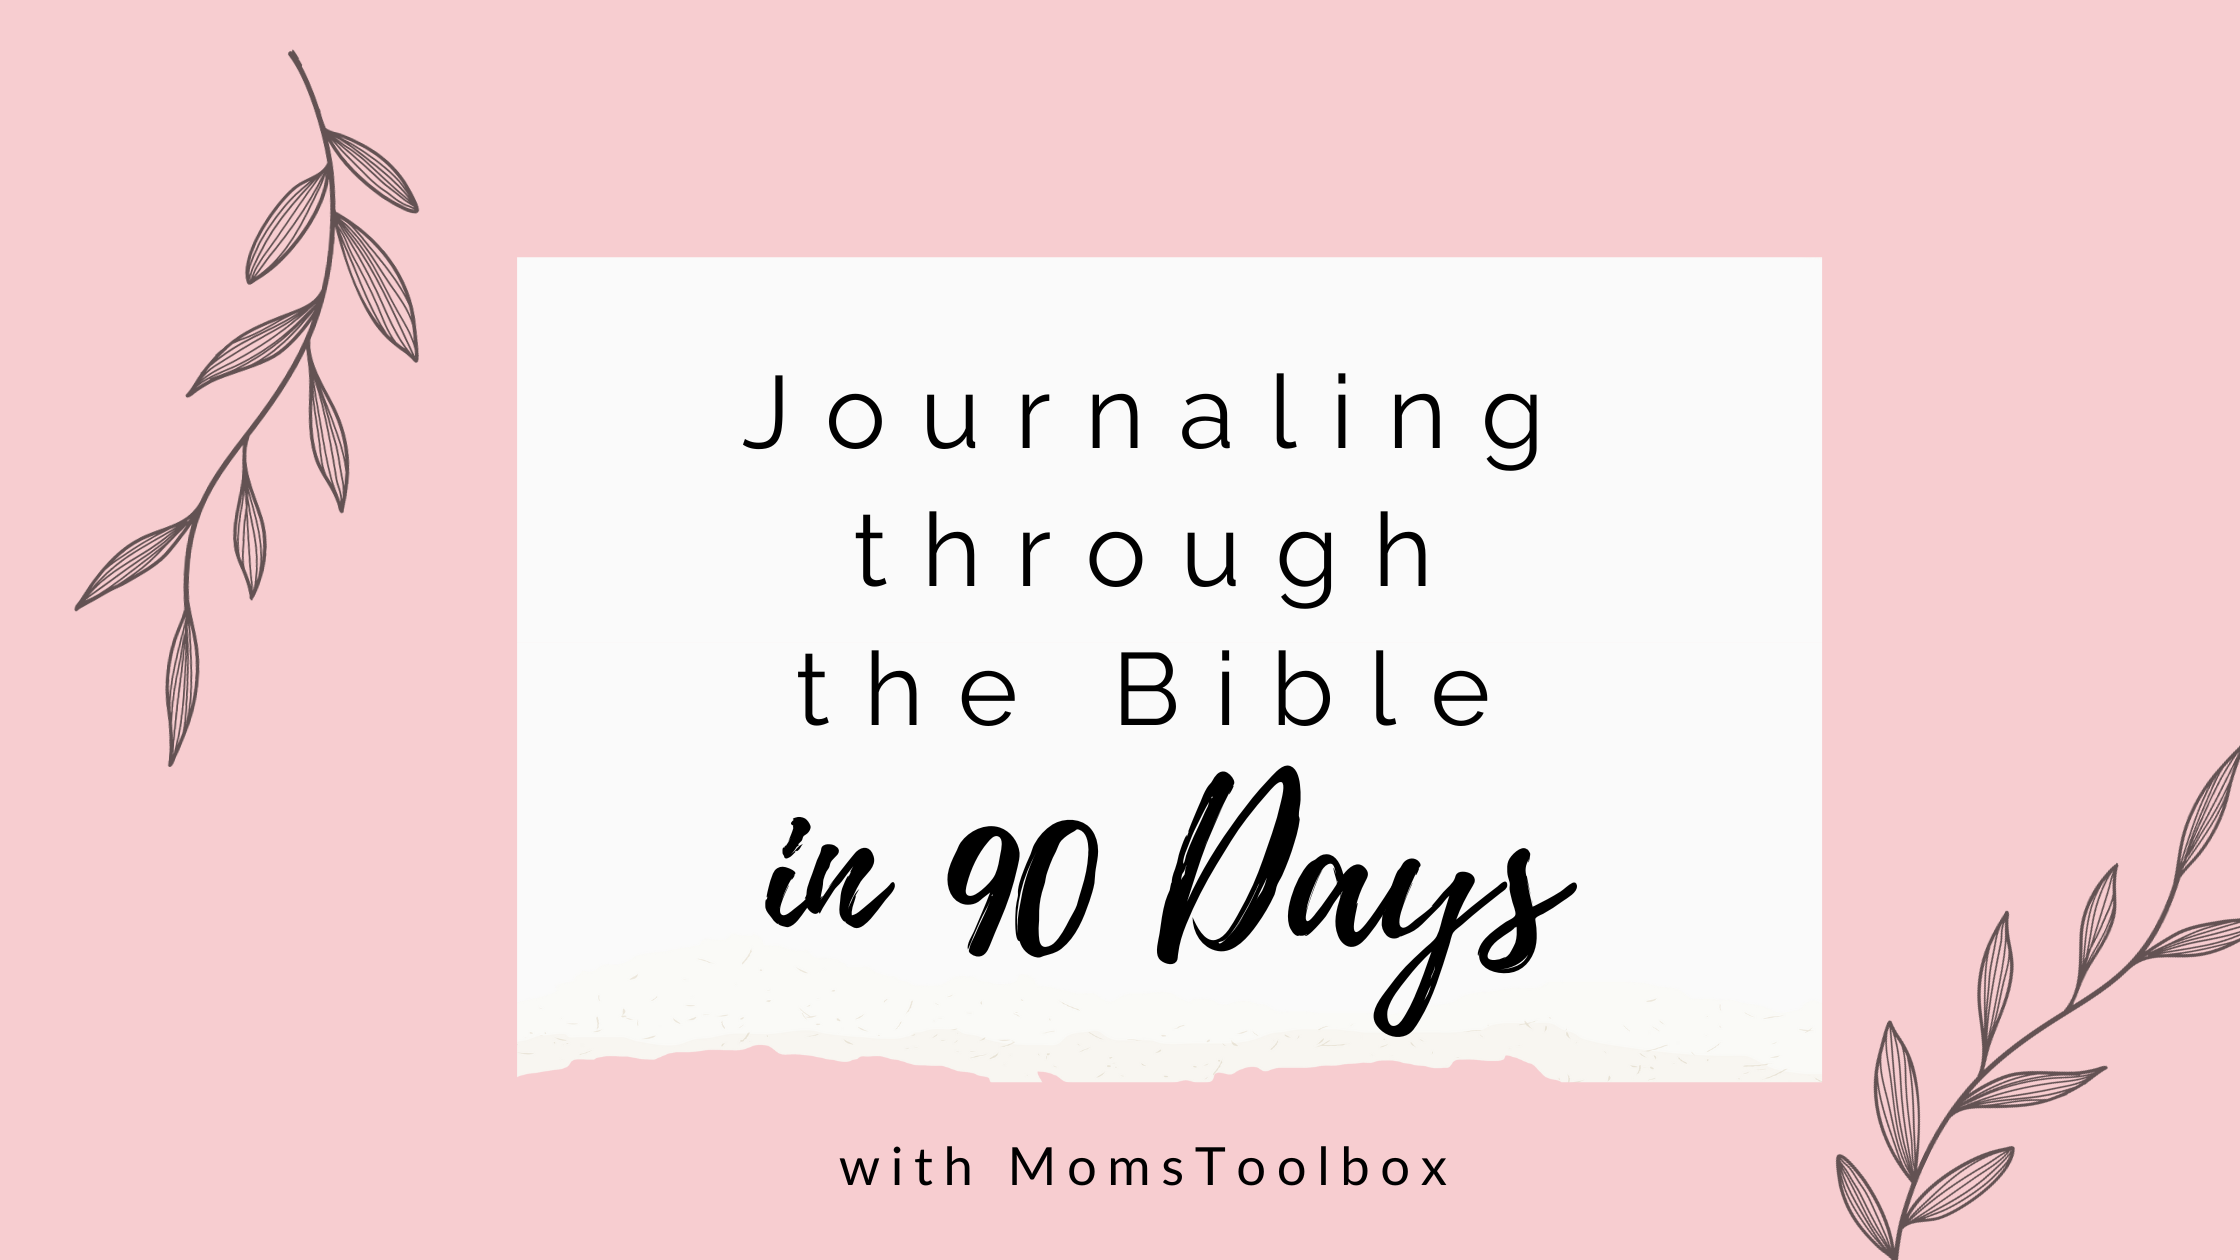 Journaling through the Bible in 90 days: Day 11